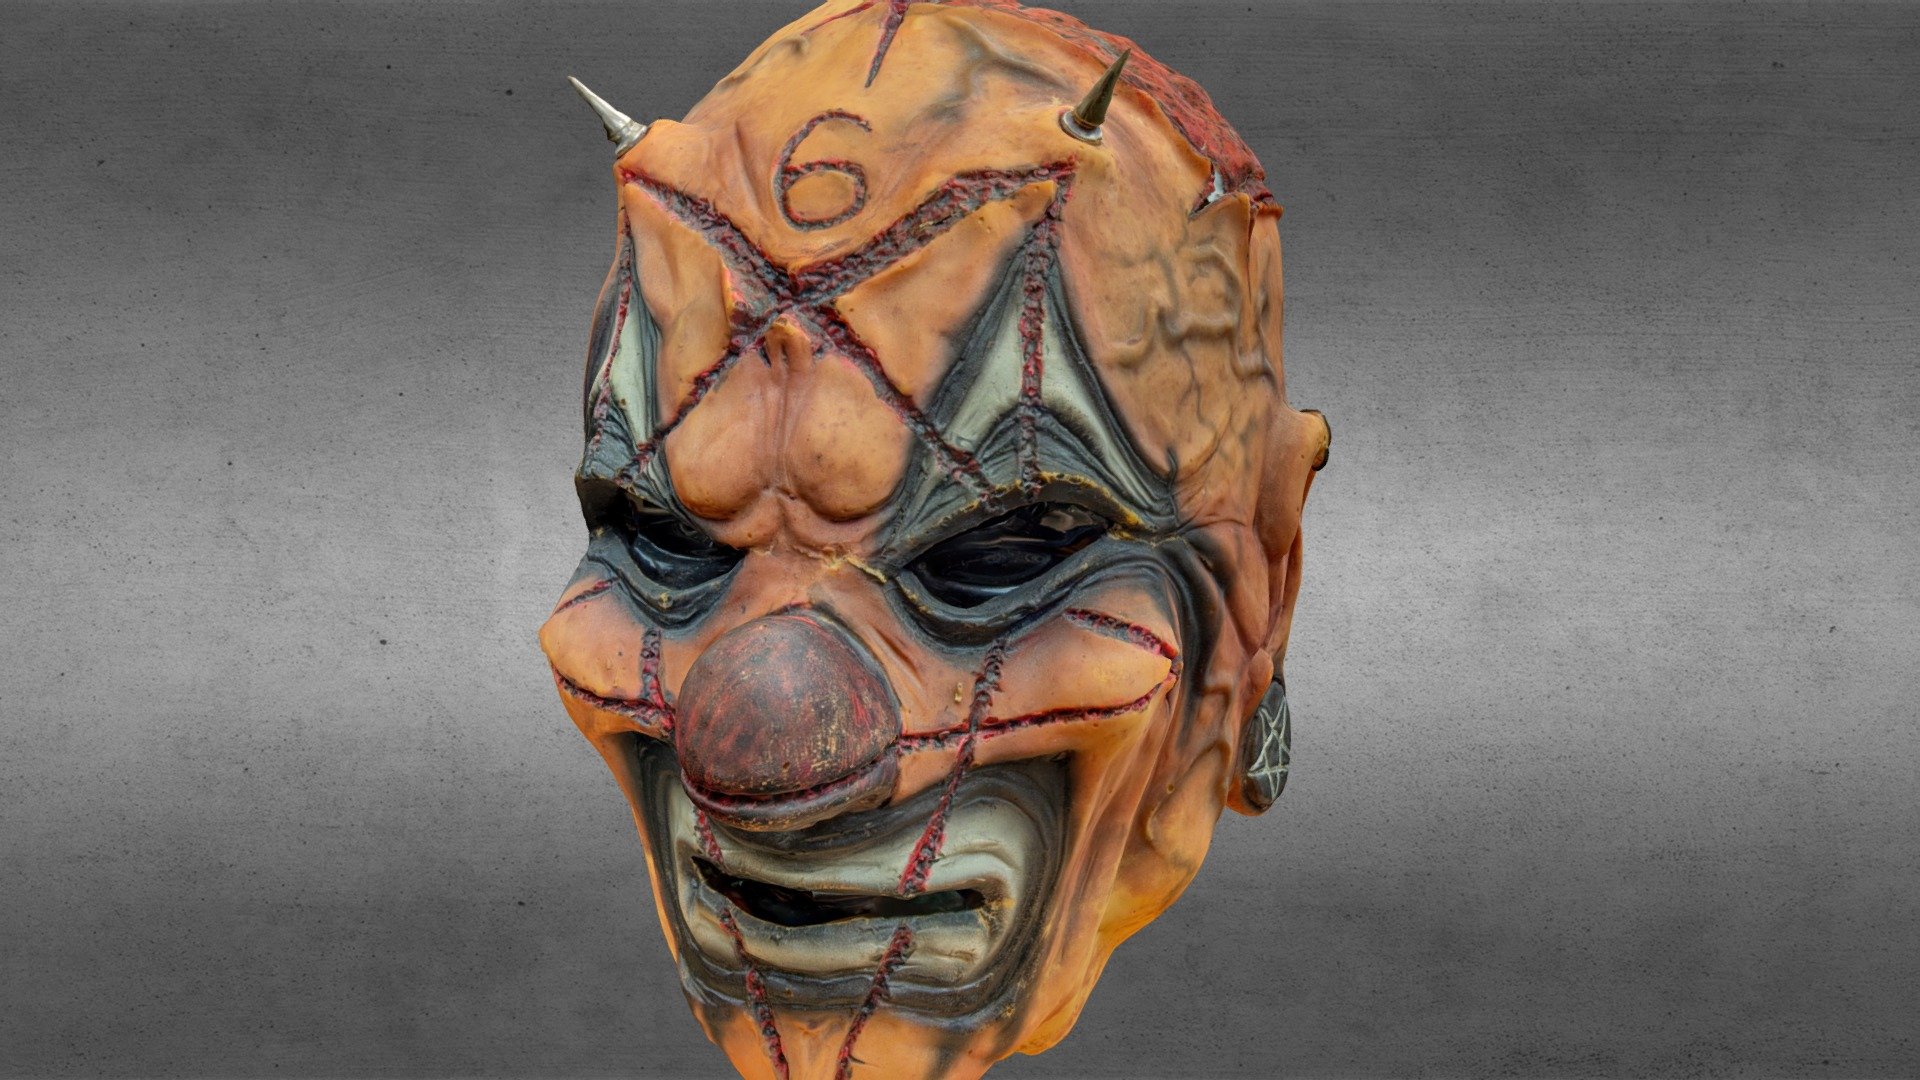 detailed scan of a real handmade silicone mask from shawn crahan / slipknot. around 70K with an 8K texture 3d model